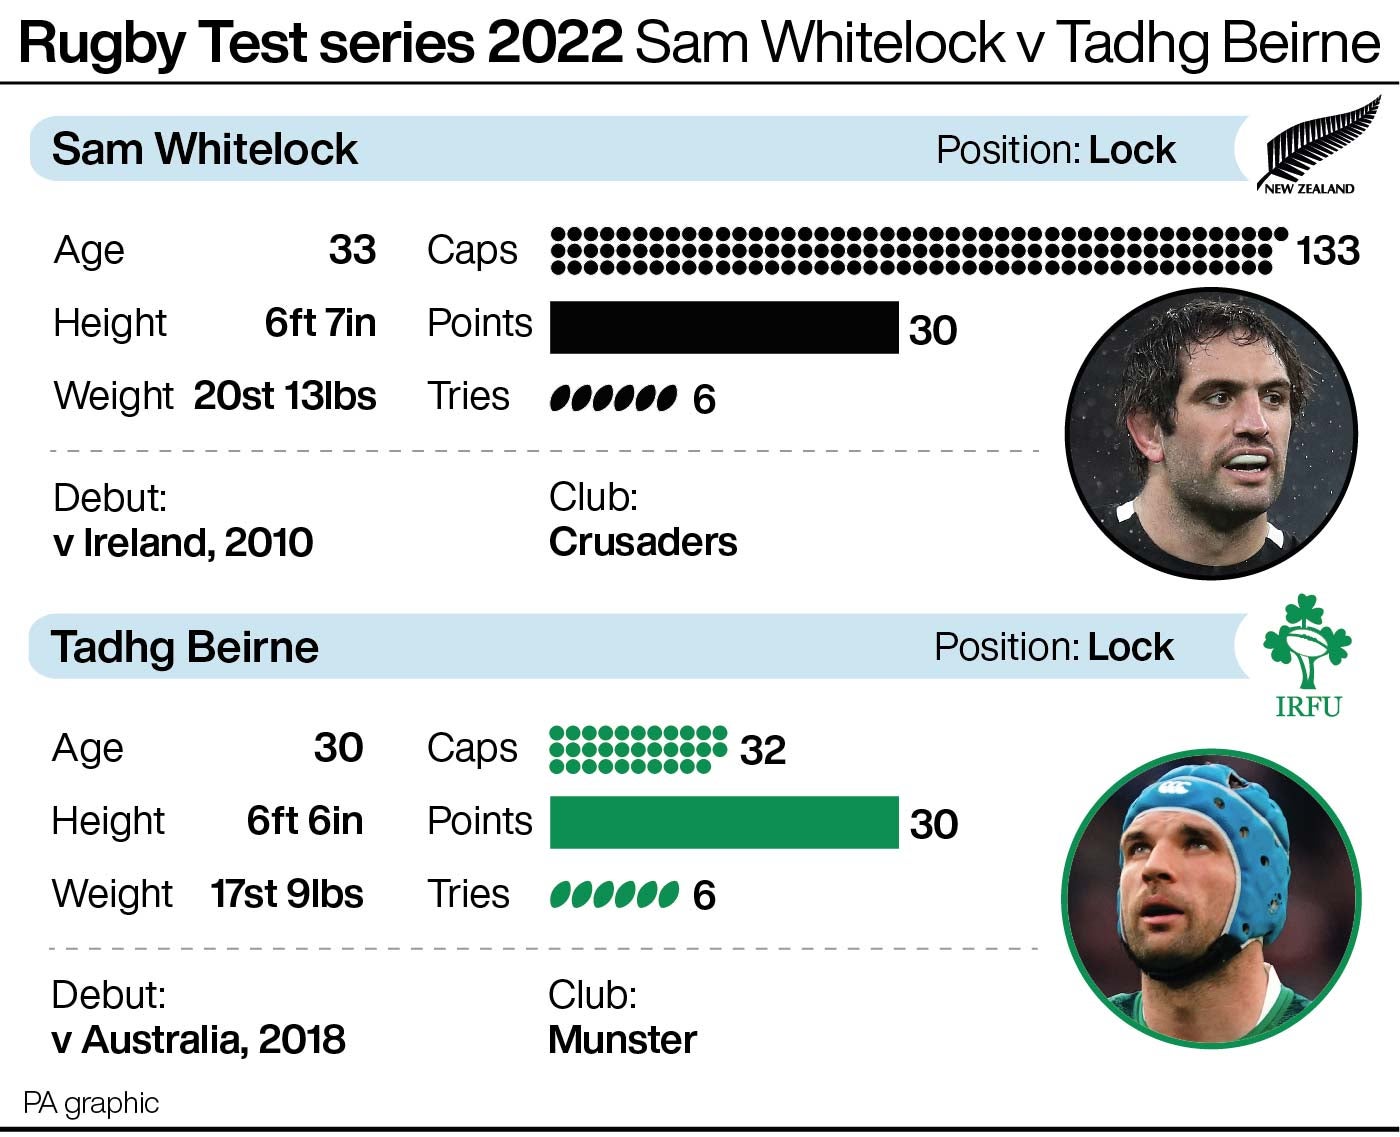 Sam Whitelock and Tadgh Beirne (PA graphic)